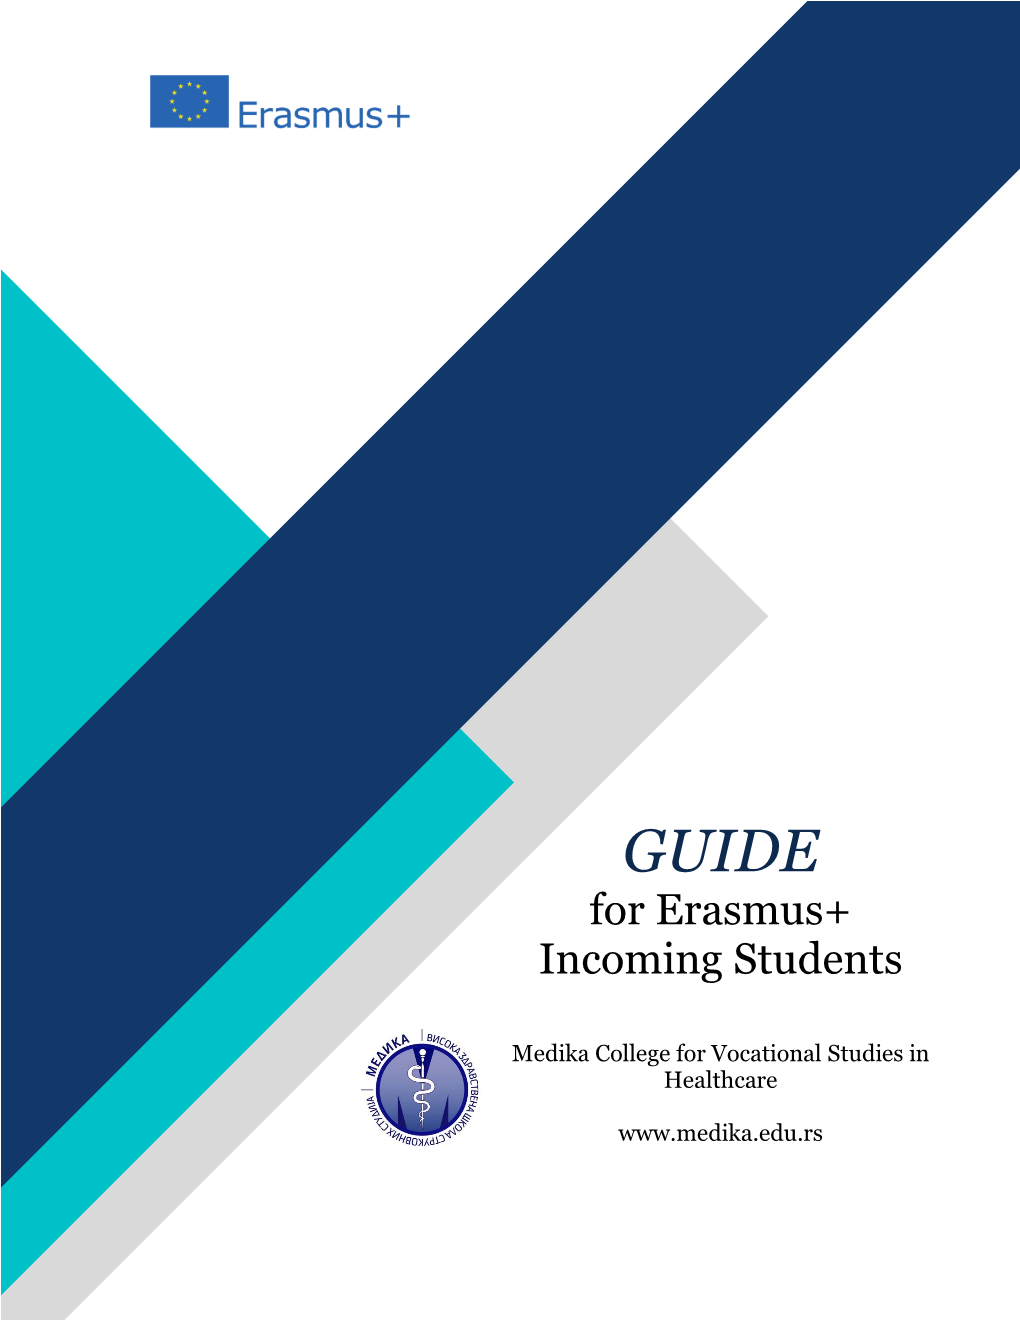 For Erasmus+ Incoming Students